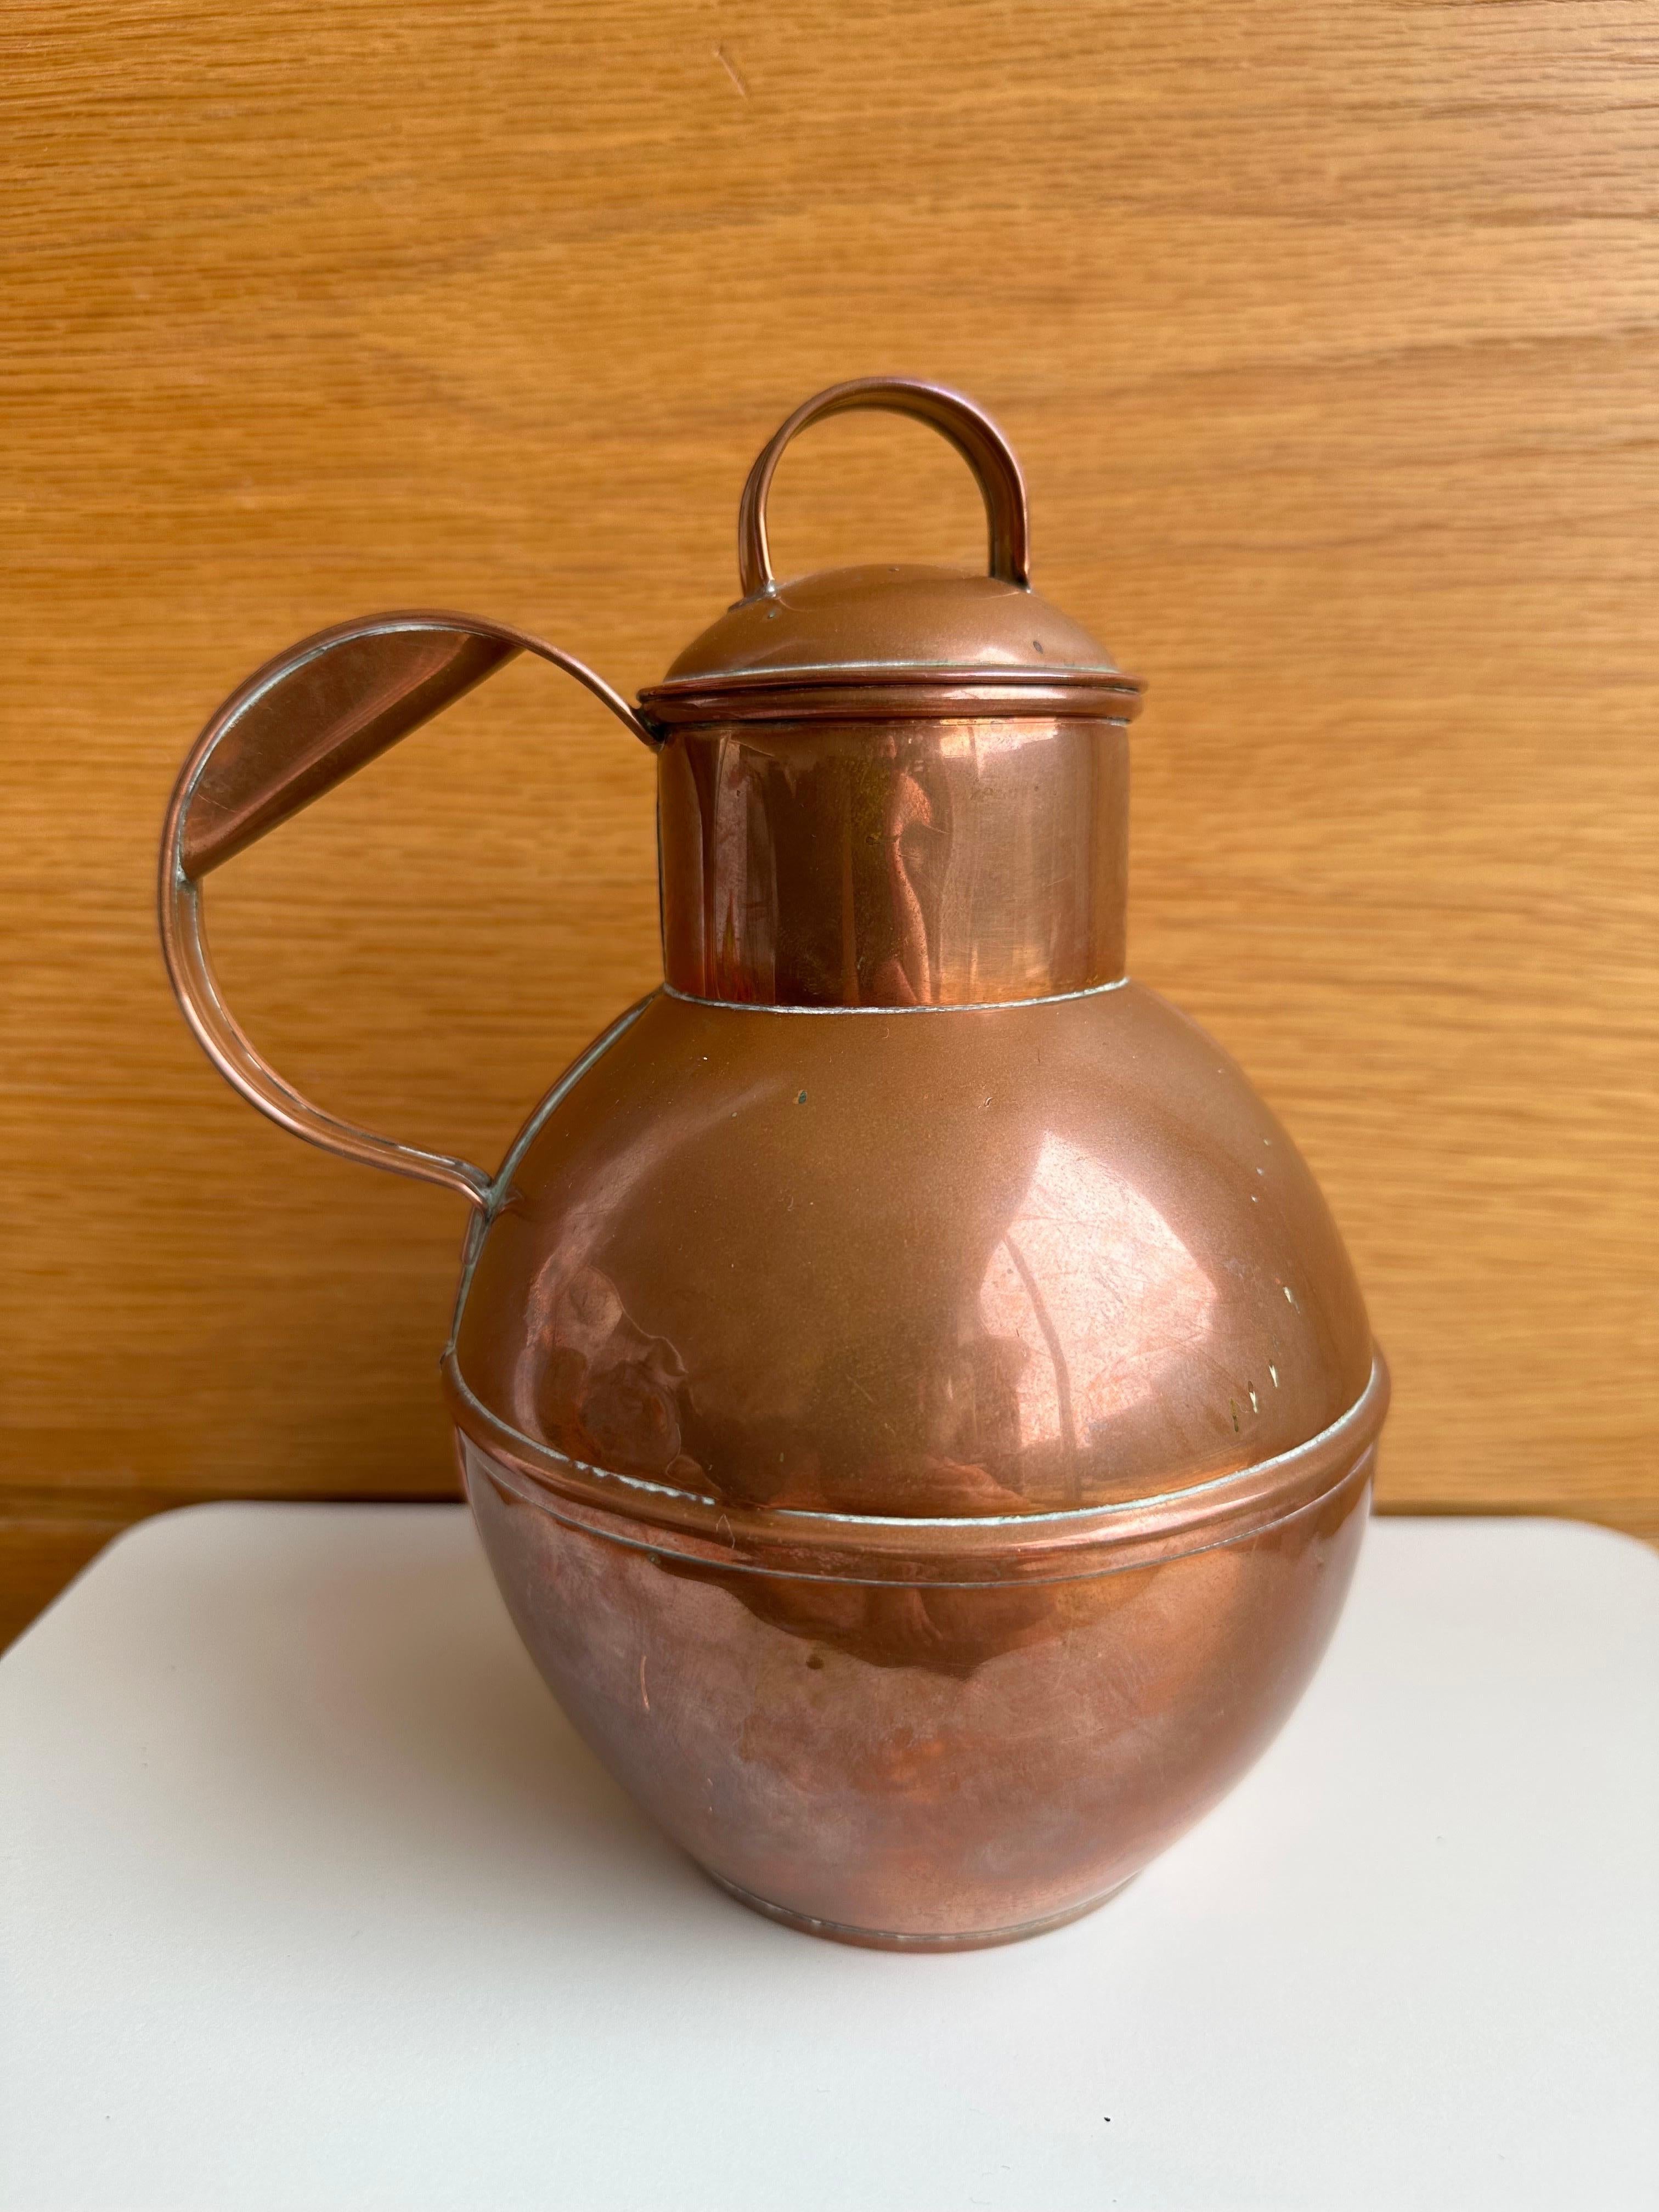 A beautiful Guernsey Copper Lidded Guernsey Milk Creamer Jug, 19th century.

Copper containers of varying shapes and sizes have been used in English homes and kitchens for many centuries. Copper and its alloys were particularly popular metals for